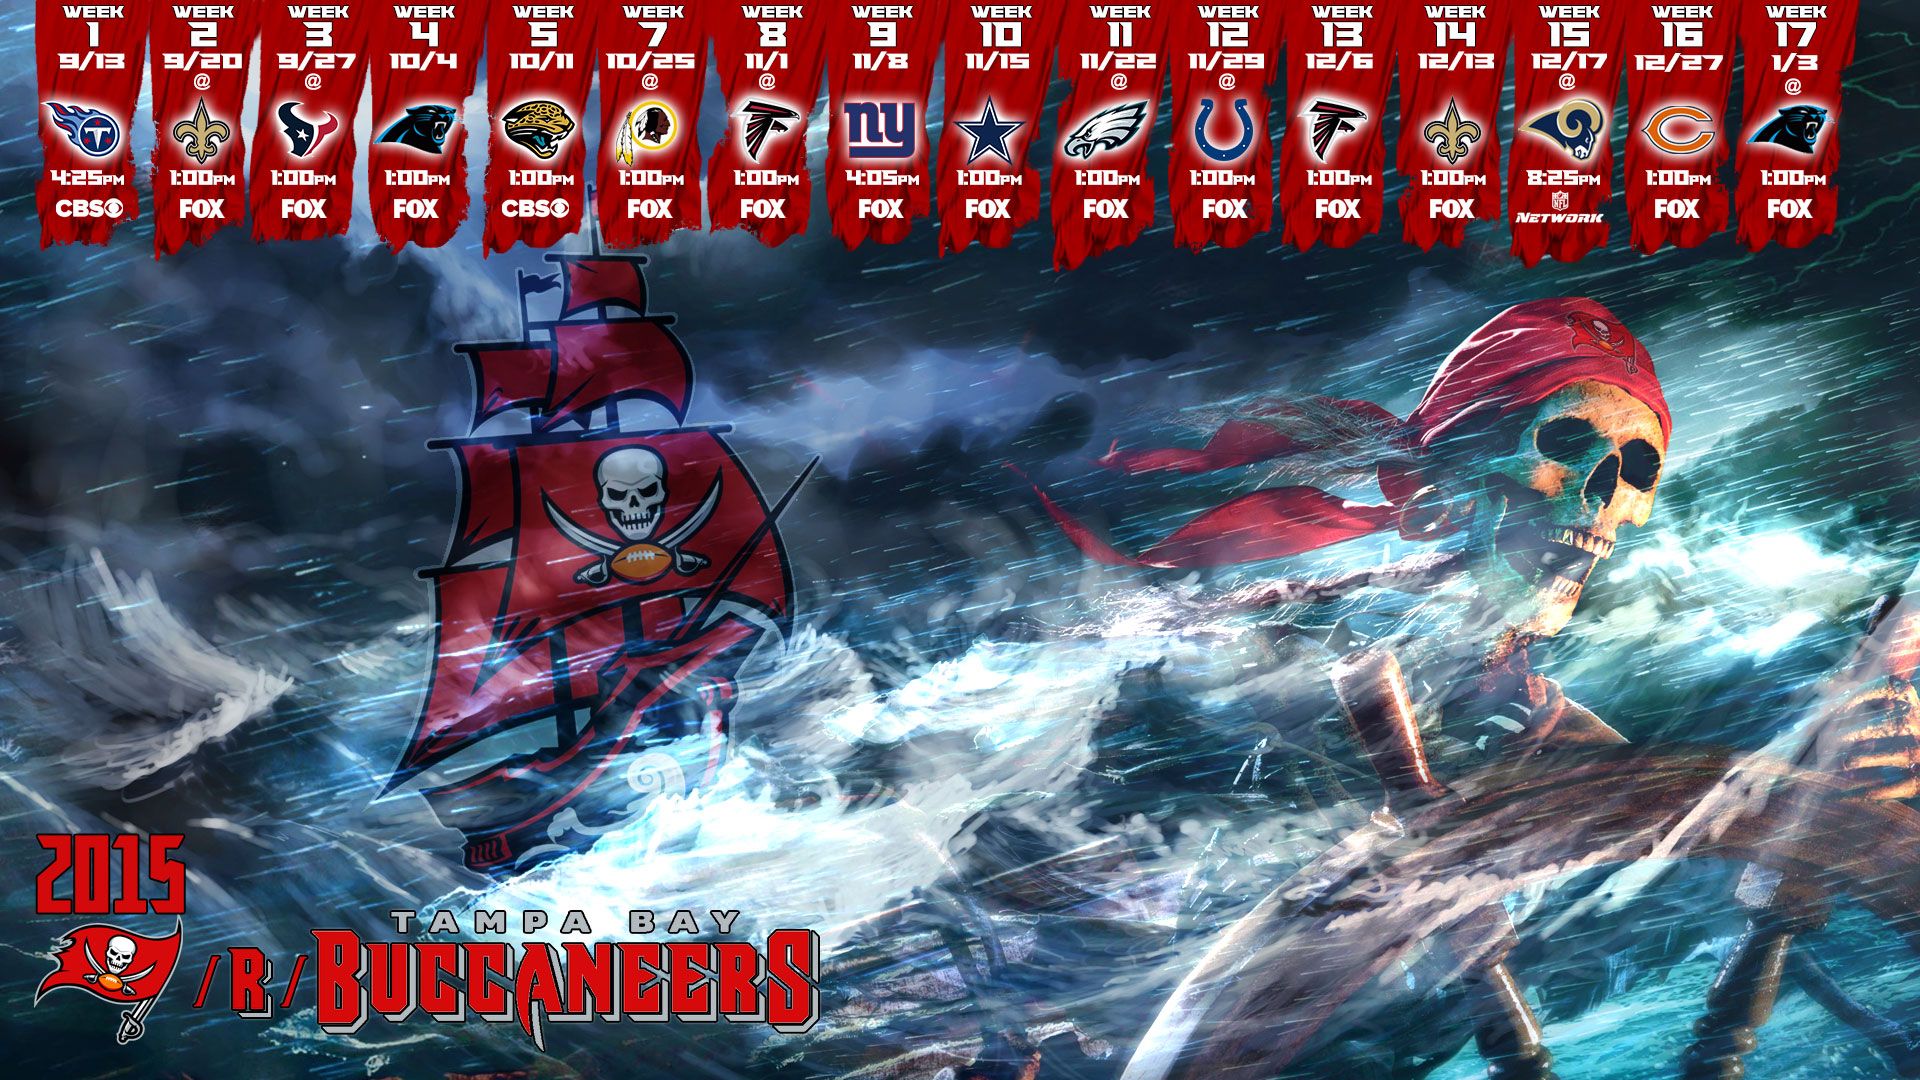 AS REQUESTED] Here is your 2015 /r/BUCCANEERS Schedule Wallpaper ...